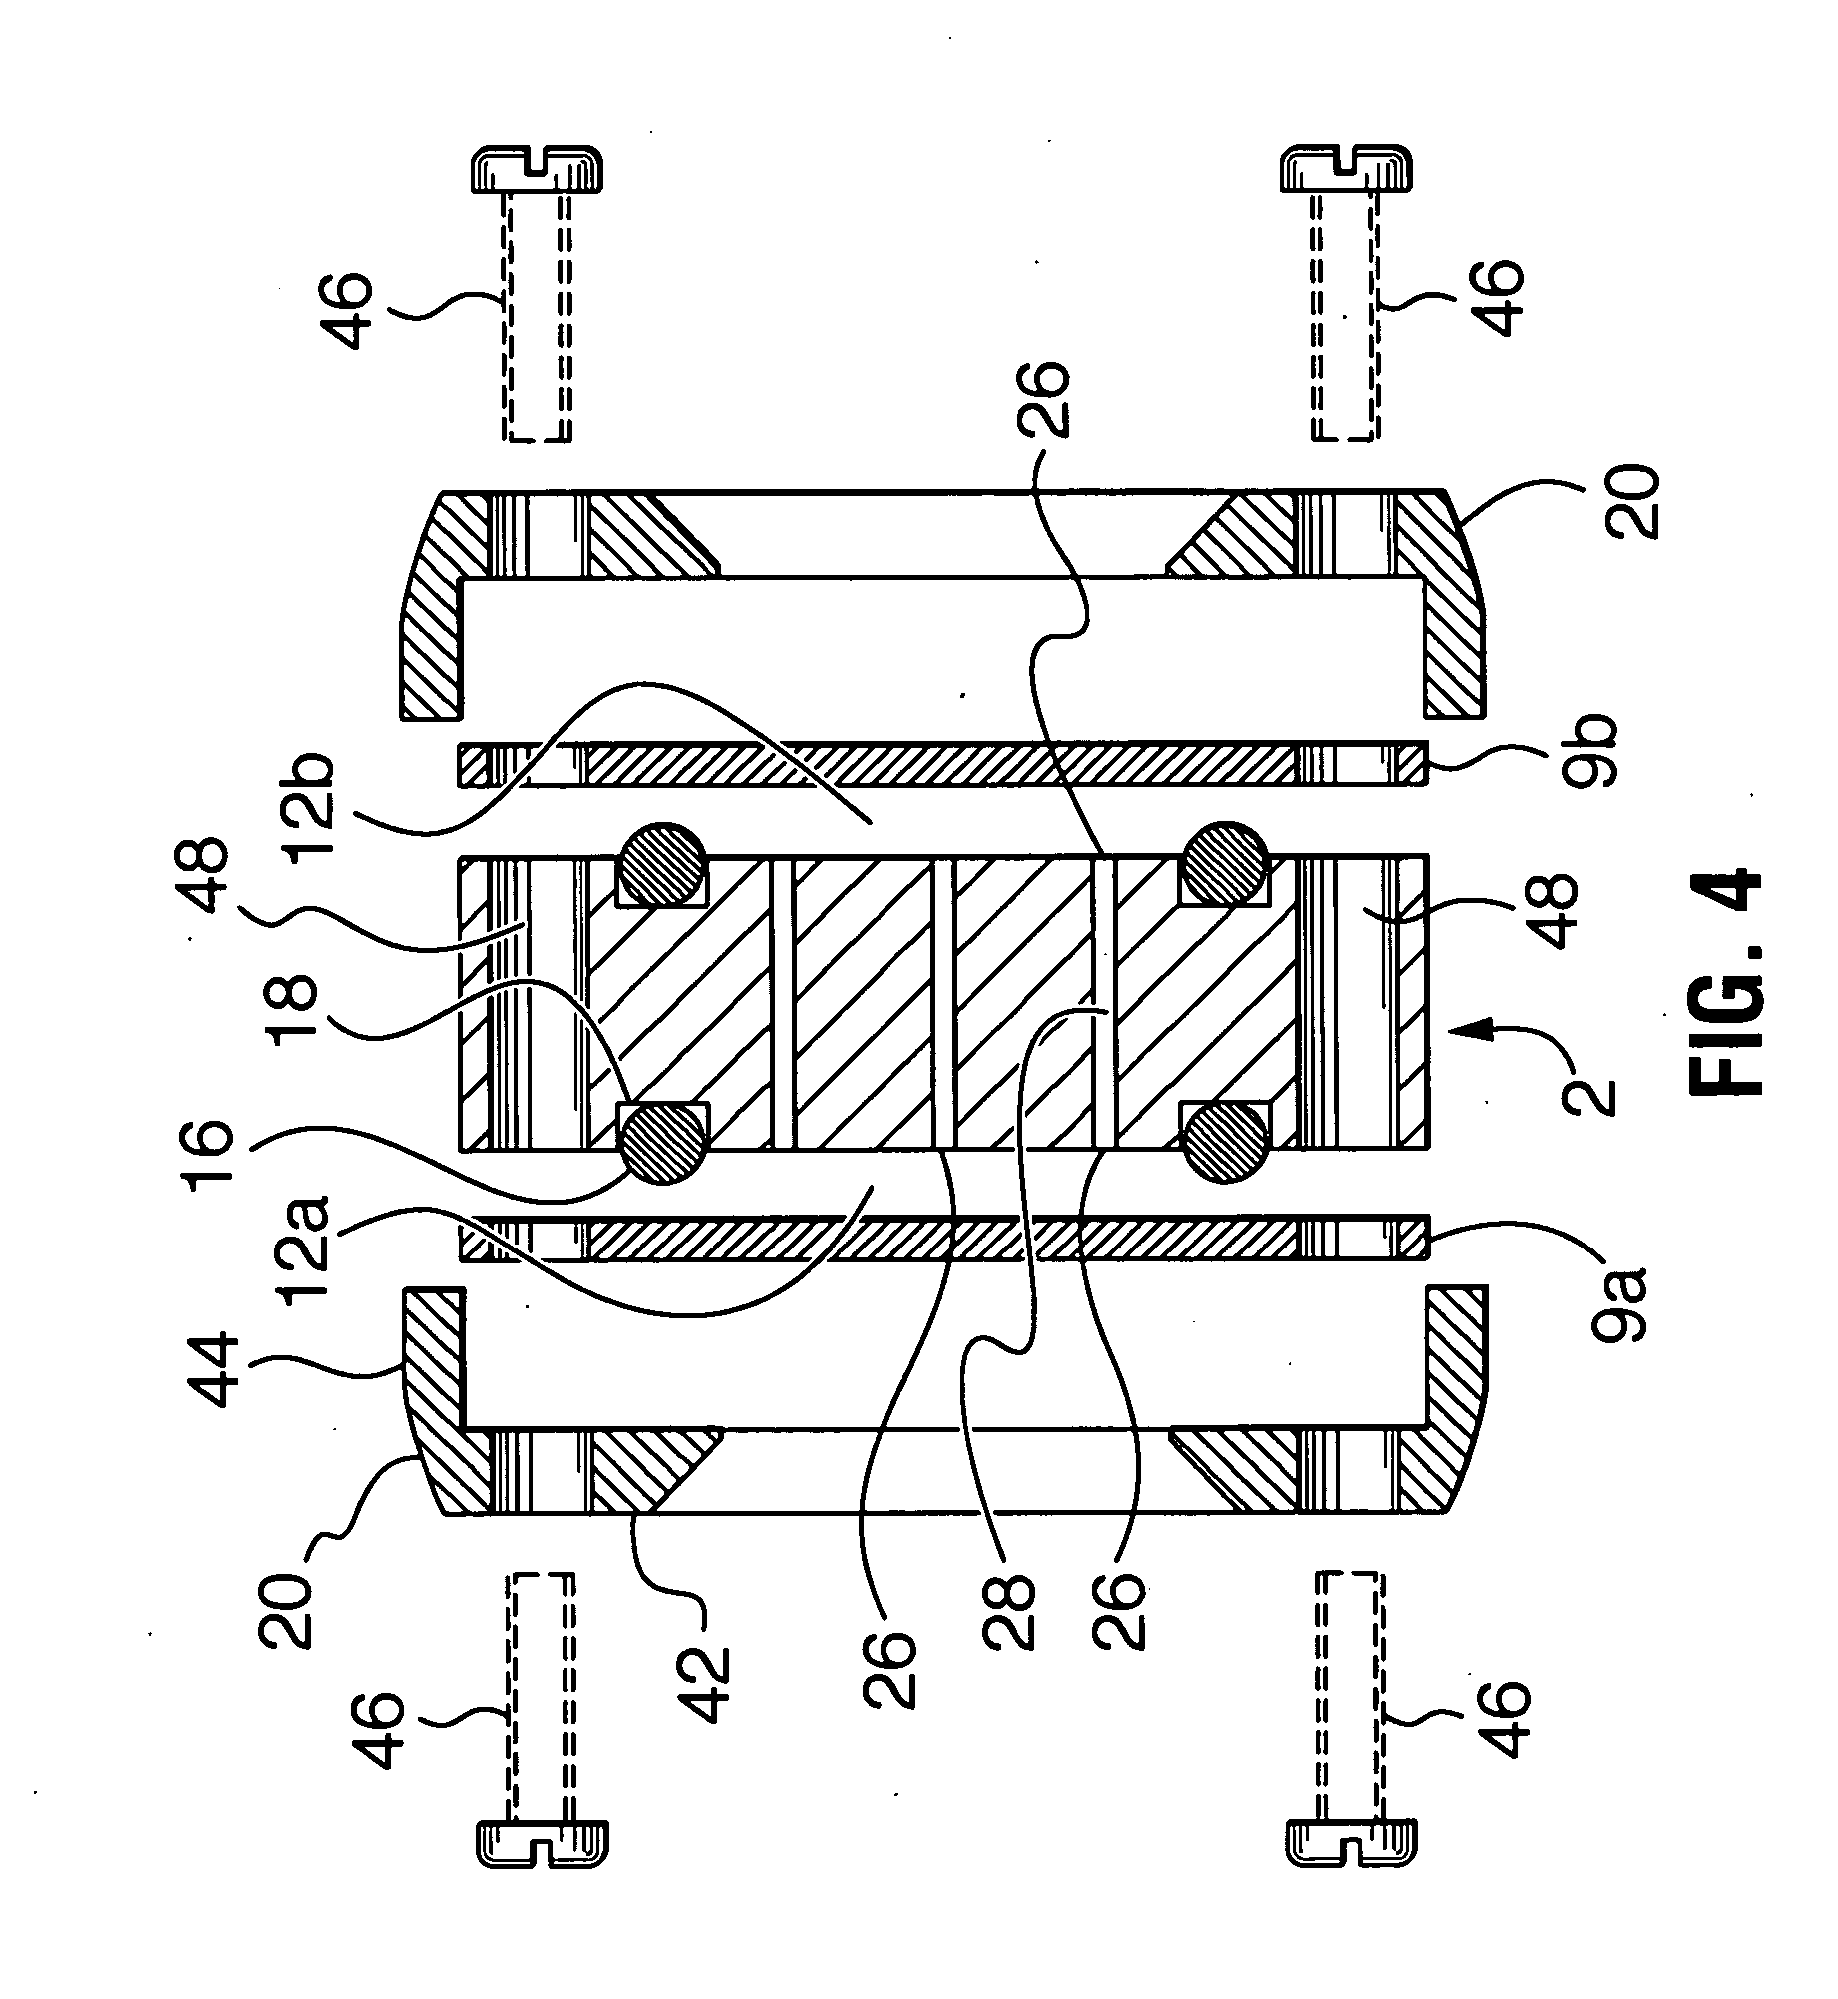 Sheet-form membrane sample probe, method and apparatus for fluid concentration analysis